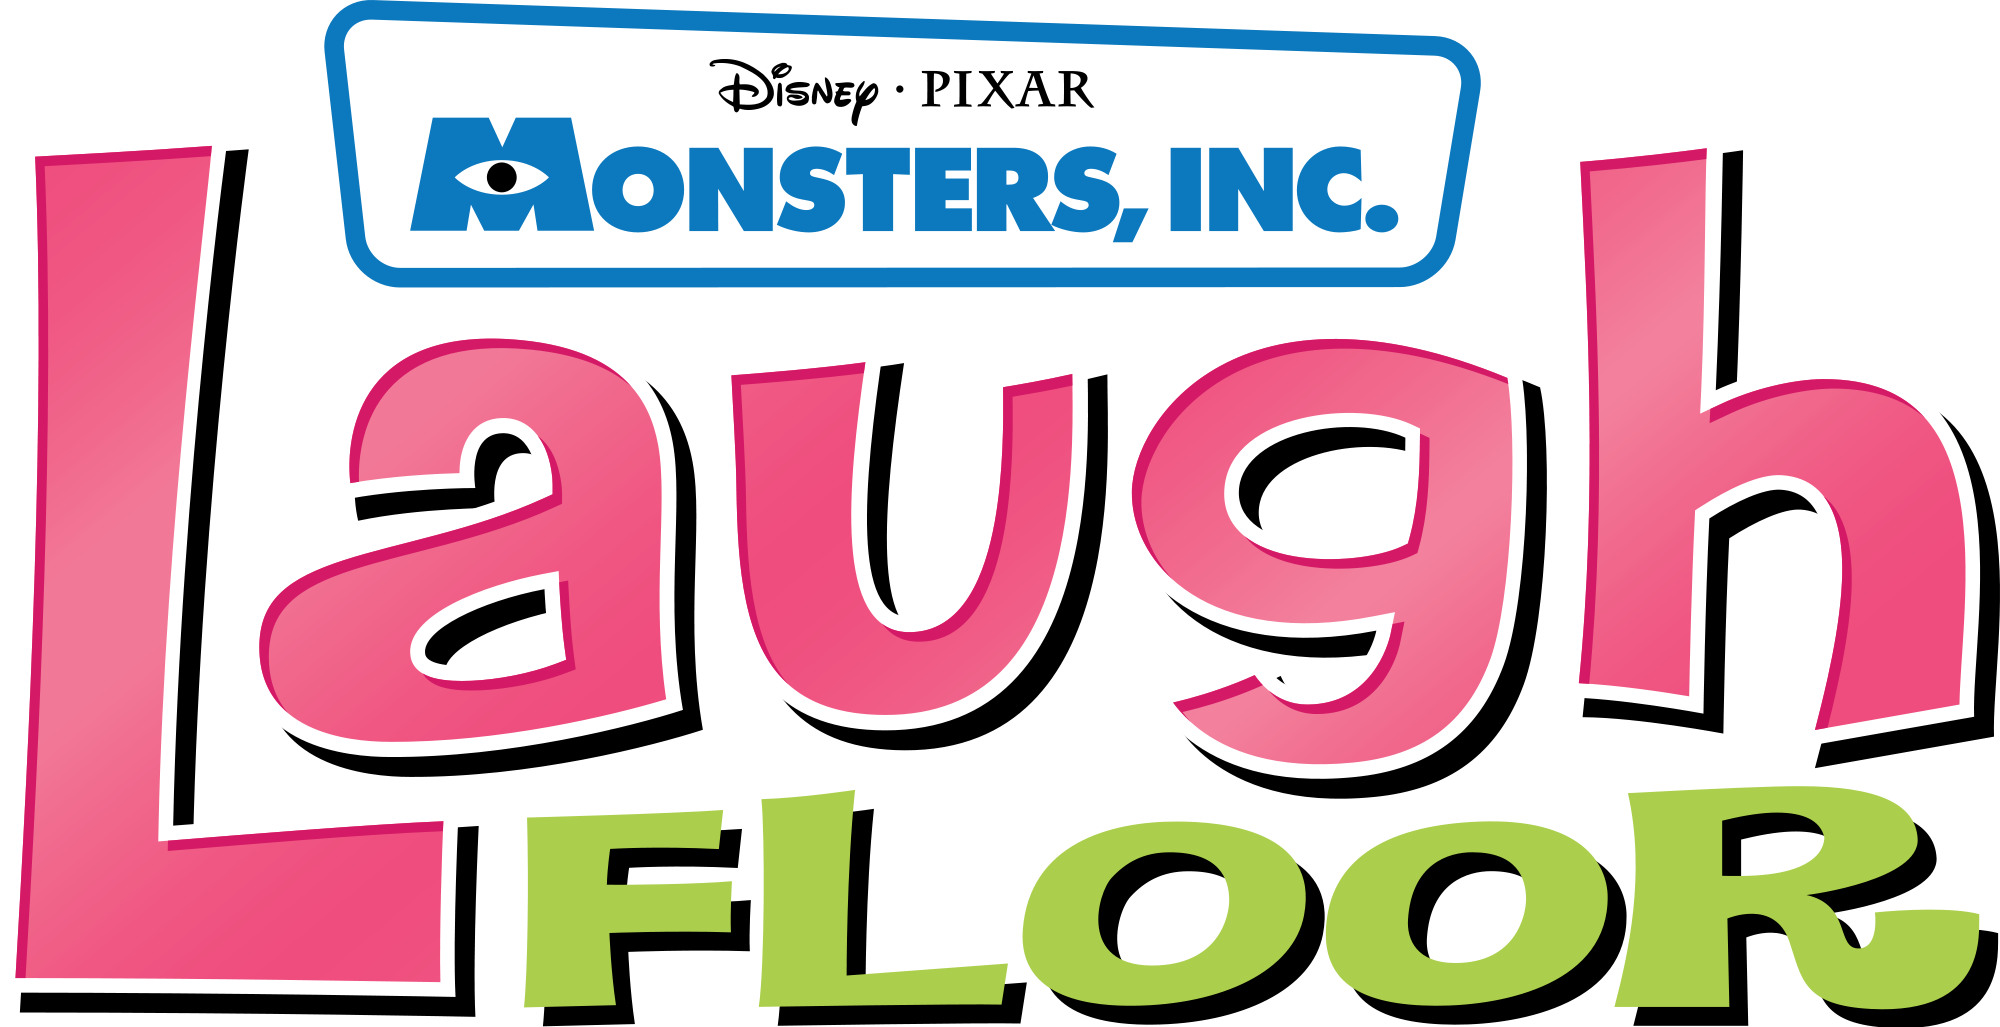 Monsters Inc Laugh Floor - Tomorrowland's newest attraction